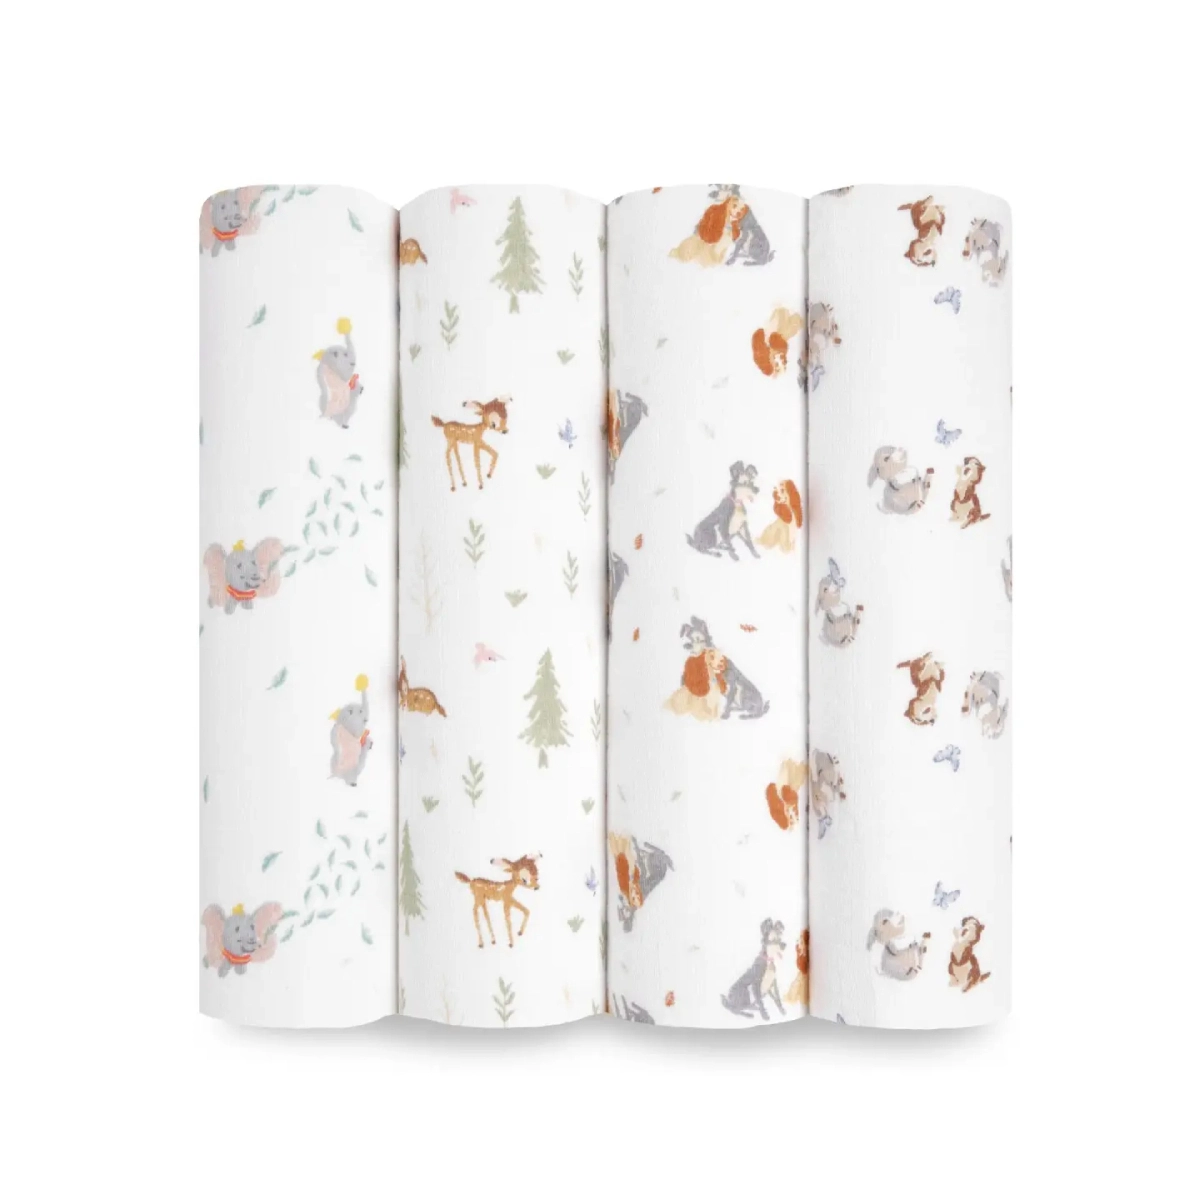 Image of Aden + Anais Pack of 4 Essentials Cotton Muslin Swaddle Blanket - Disney + Friends (23-19-251)